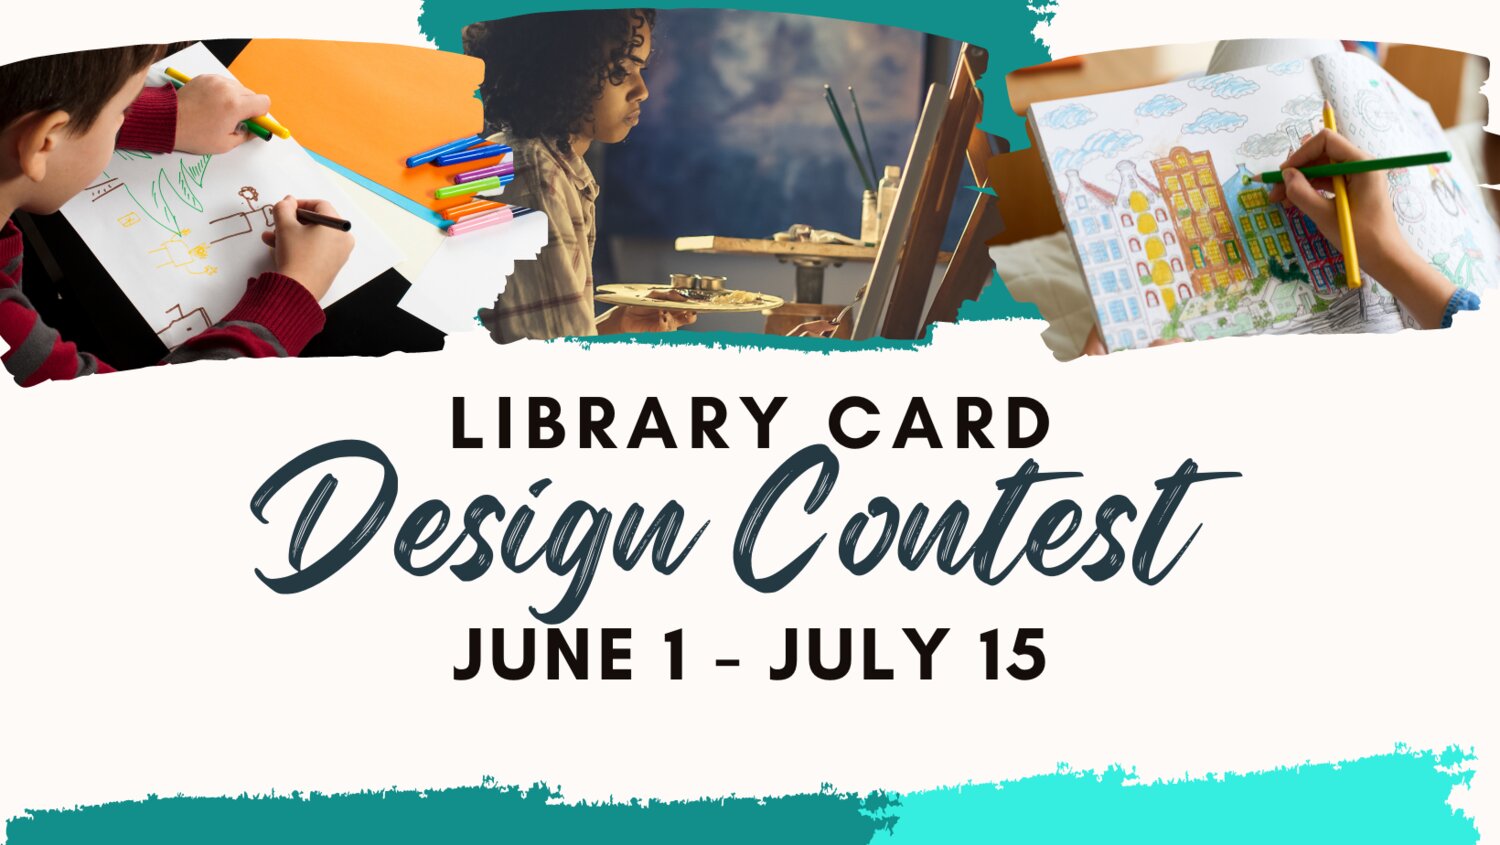 From June 1- July 15, library patrons ages 18 and under are invited to participate in designing 3 new library cards with original artwork for the Timberland Regional Library.